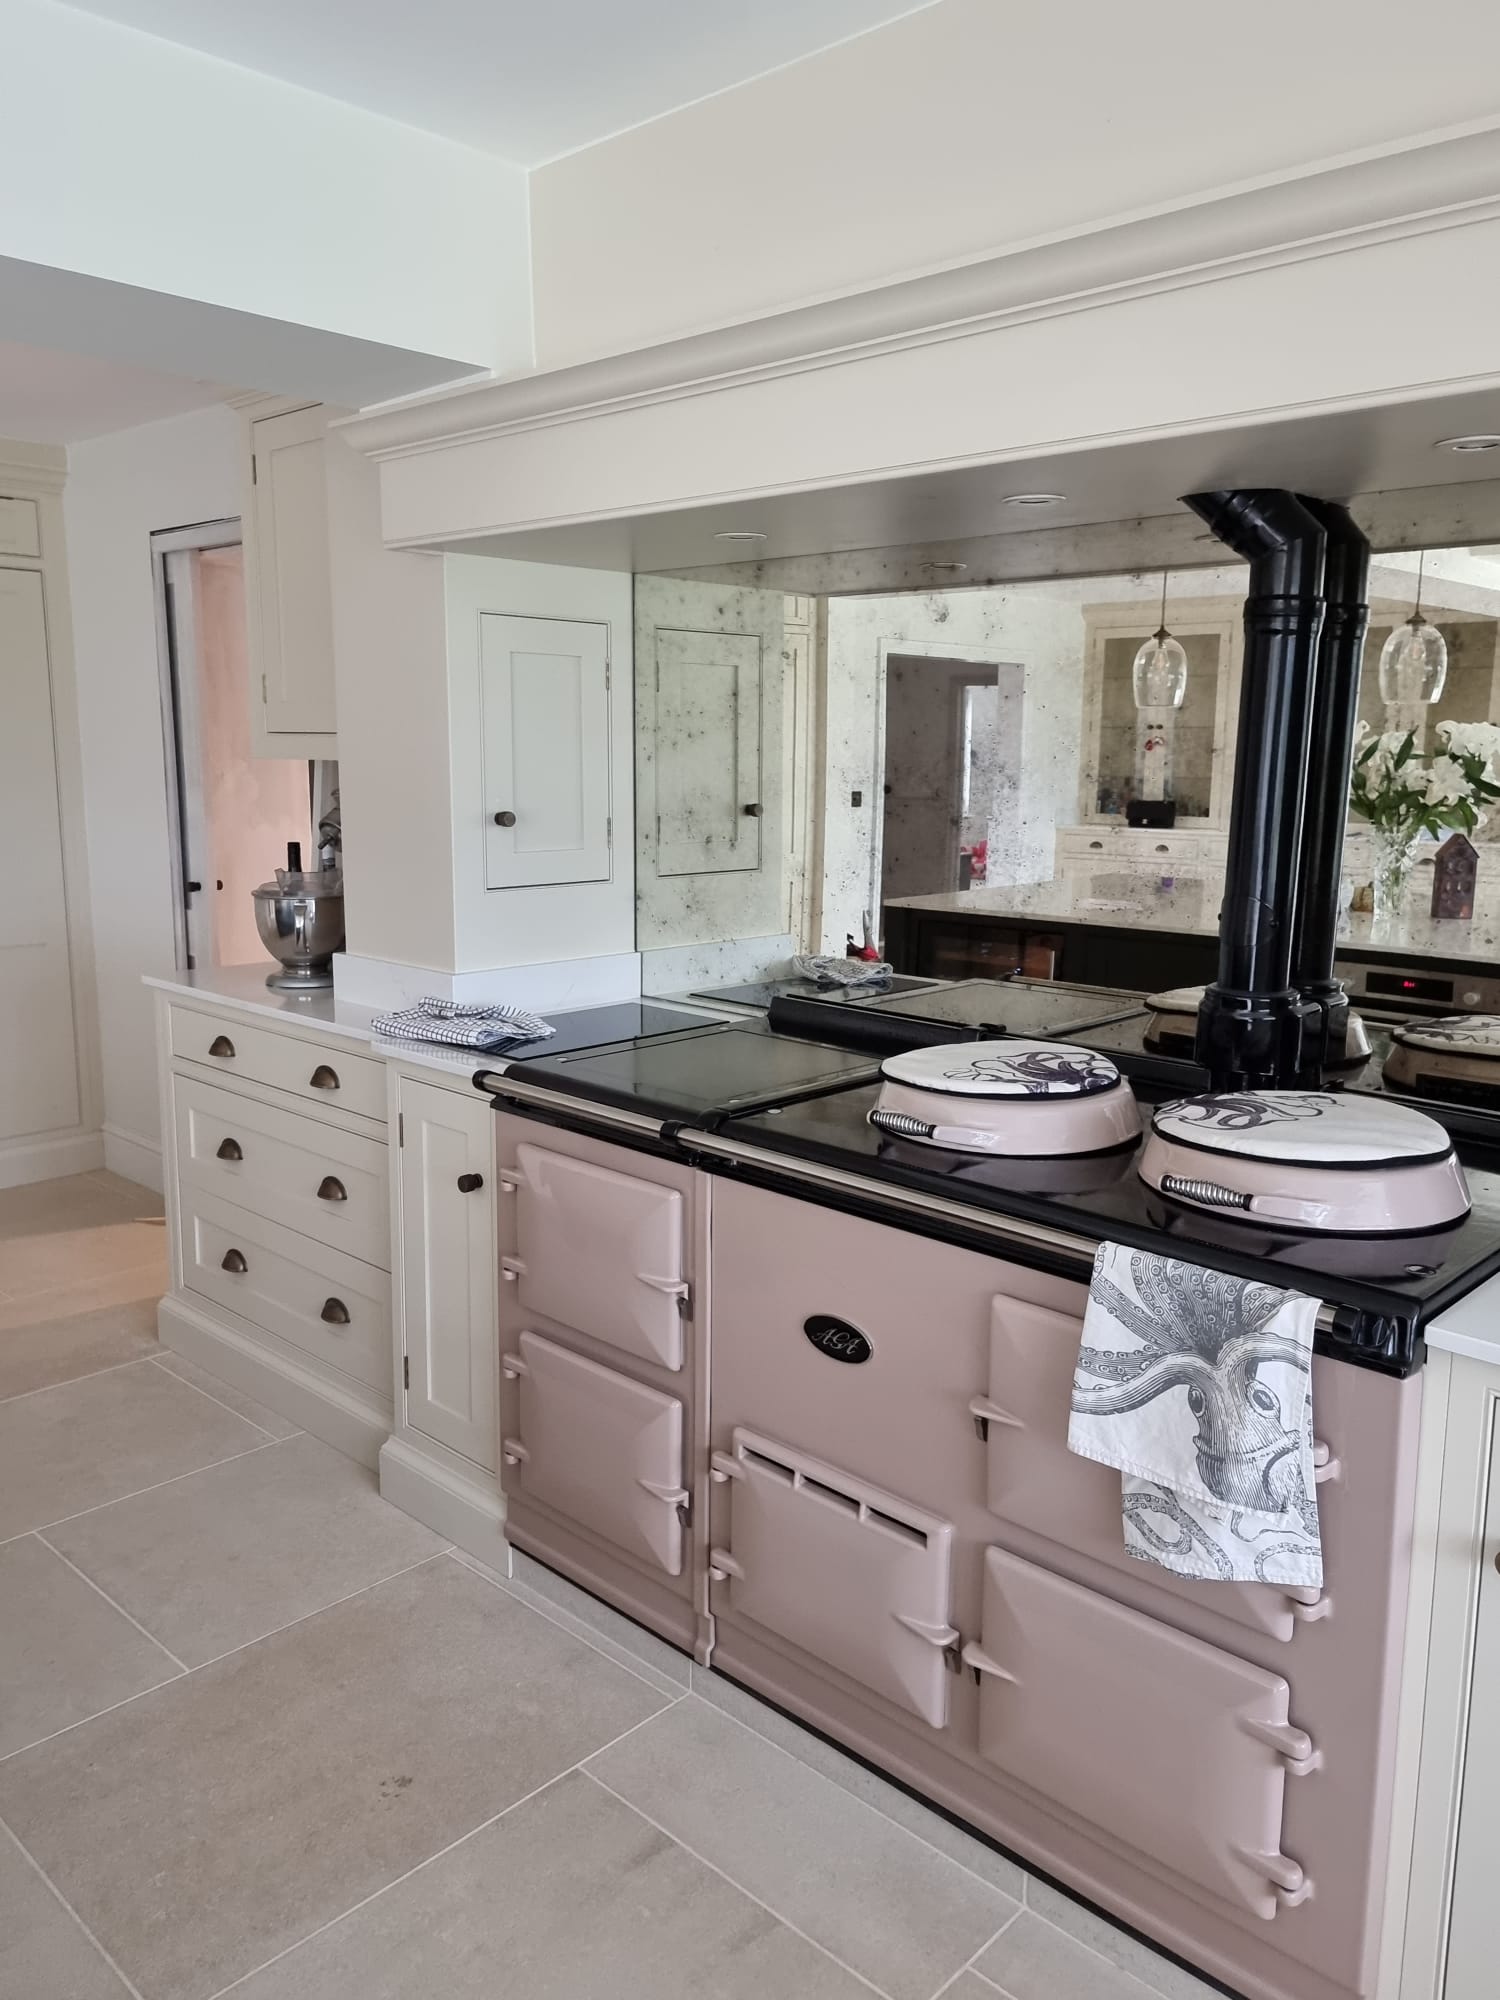 Bespoke timber kitchen units by Kings Stag Joinery